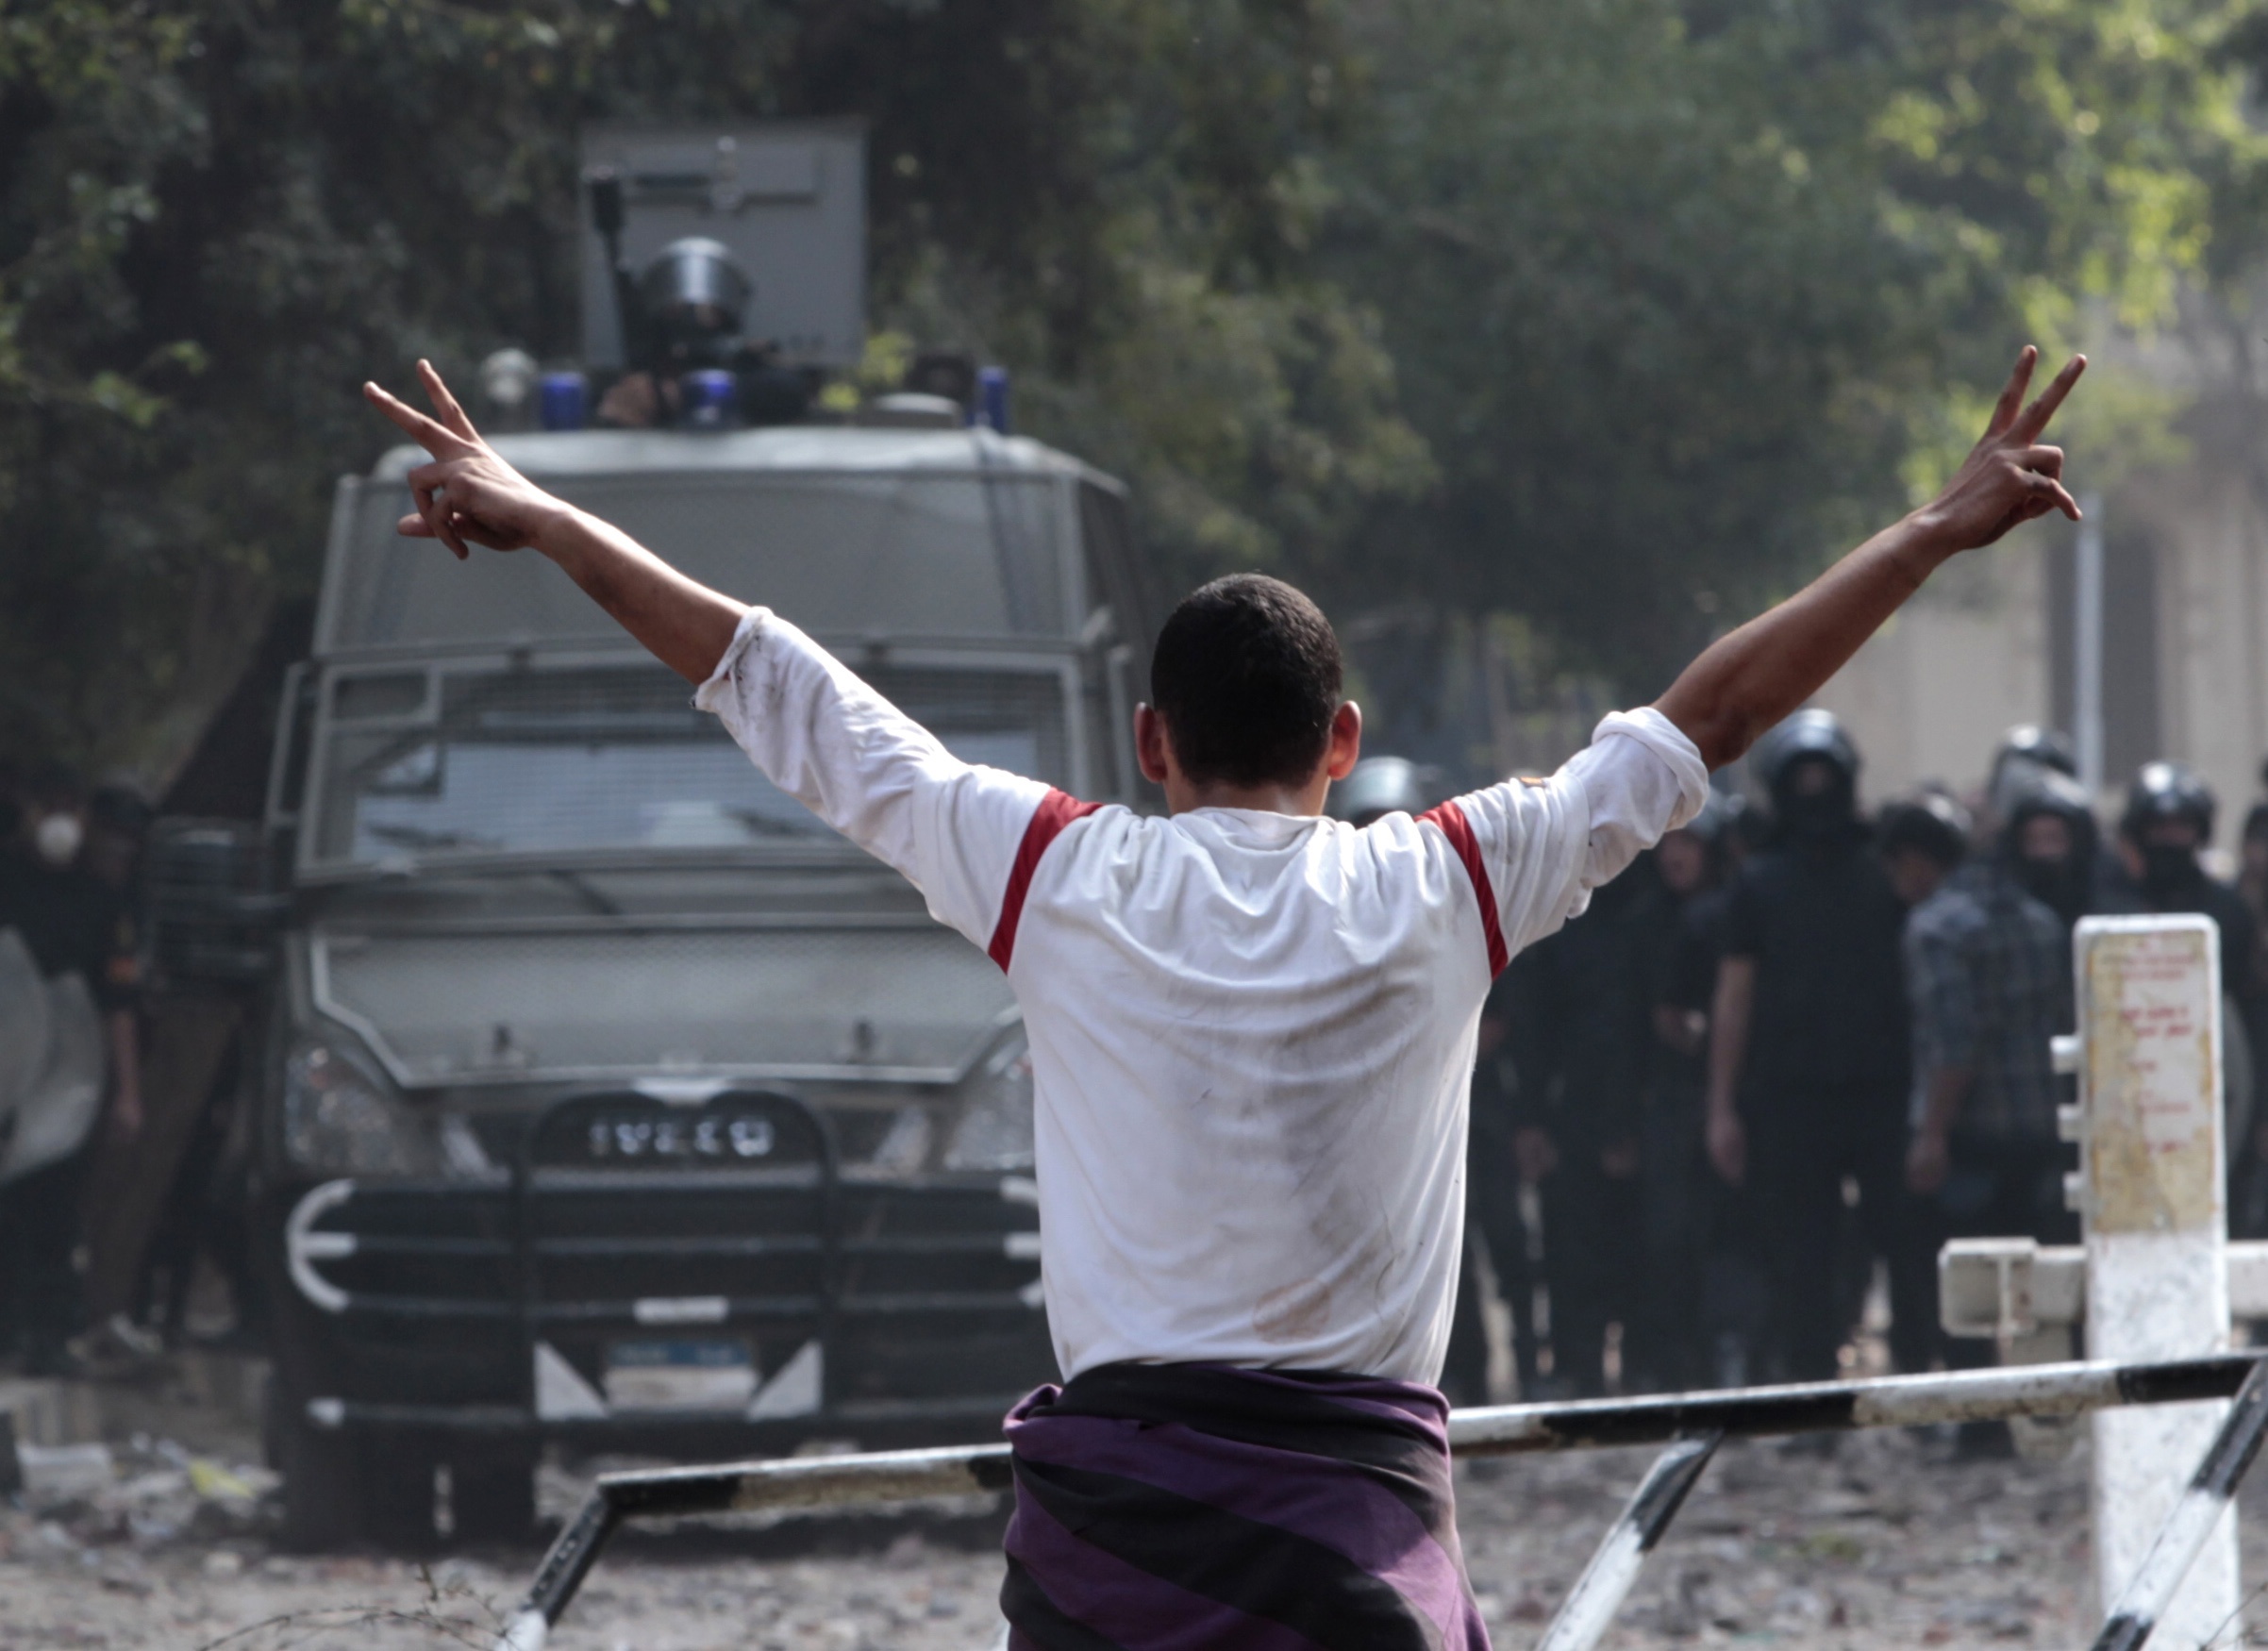 Update: Mursi opponents clash with police in Cairo